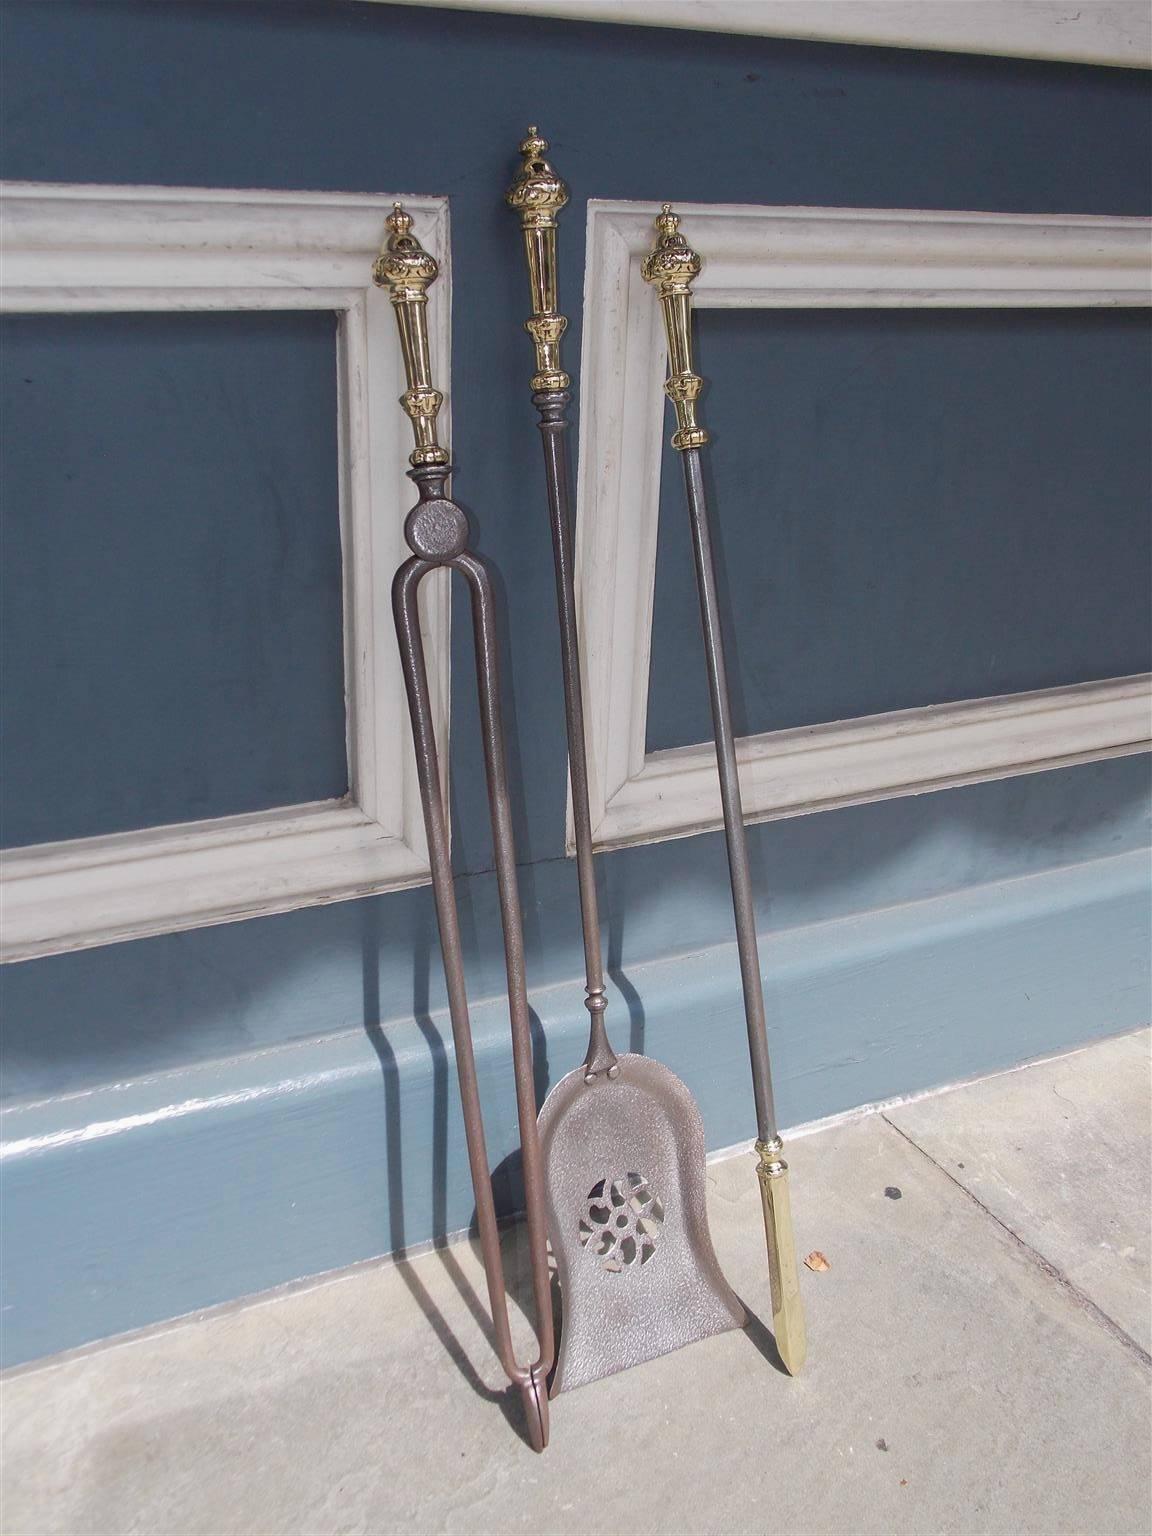 Set of three English polished steel and brass fire place tools with decorative urn finials and foliage handles. Set consist of pierced floral shovel, tong, and brass tipped poker for stoking the fire place, Early 19th century.